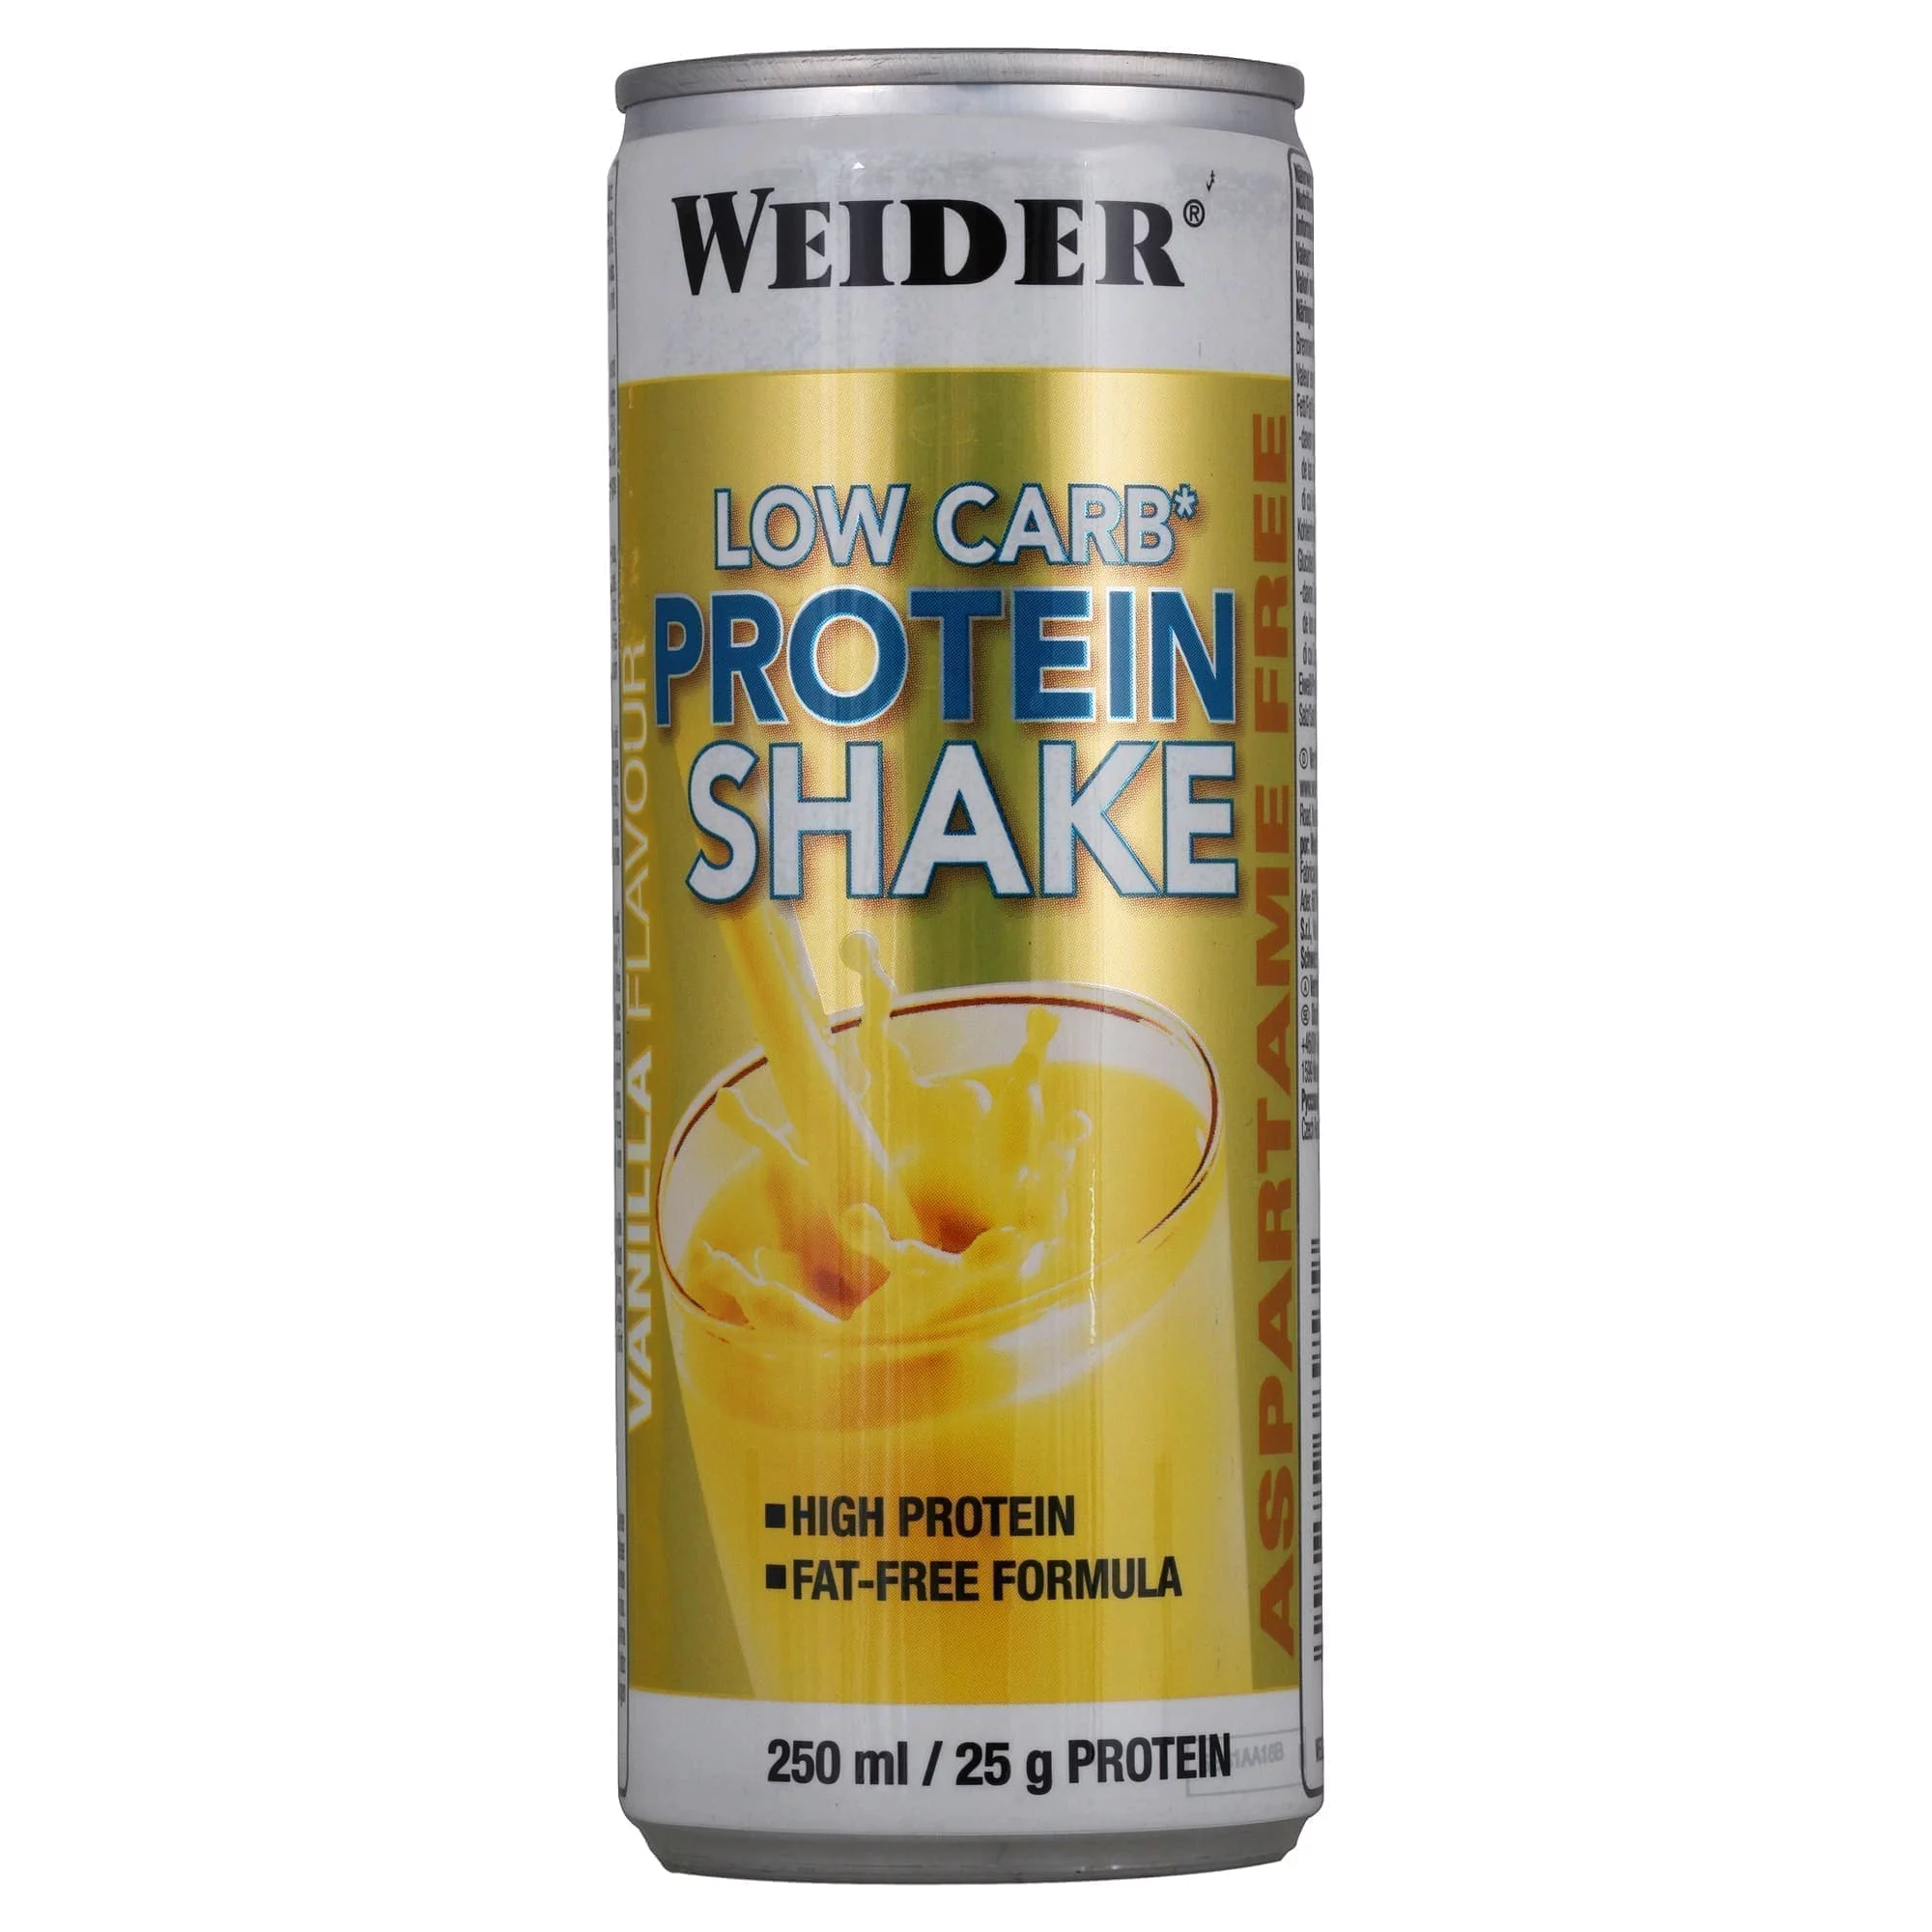 Weider Low Carb Protein Shake 250 ml фото